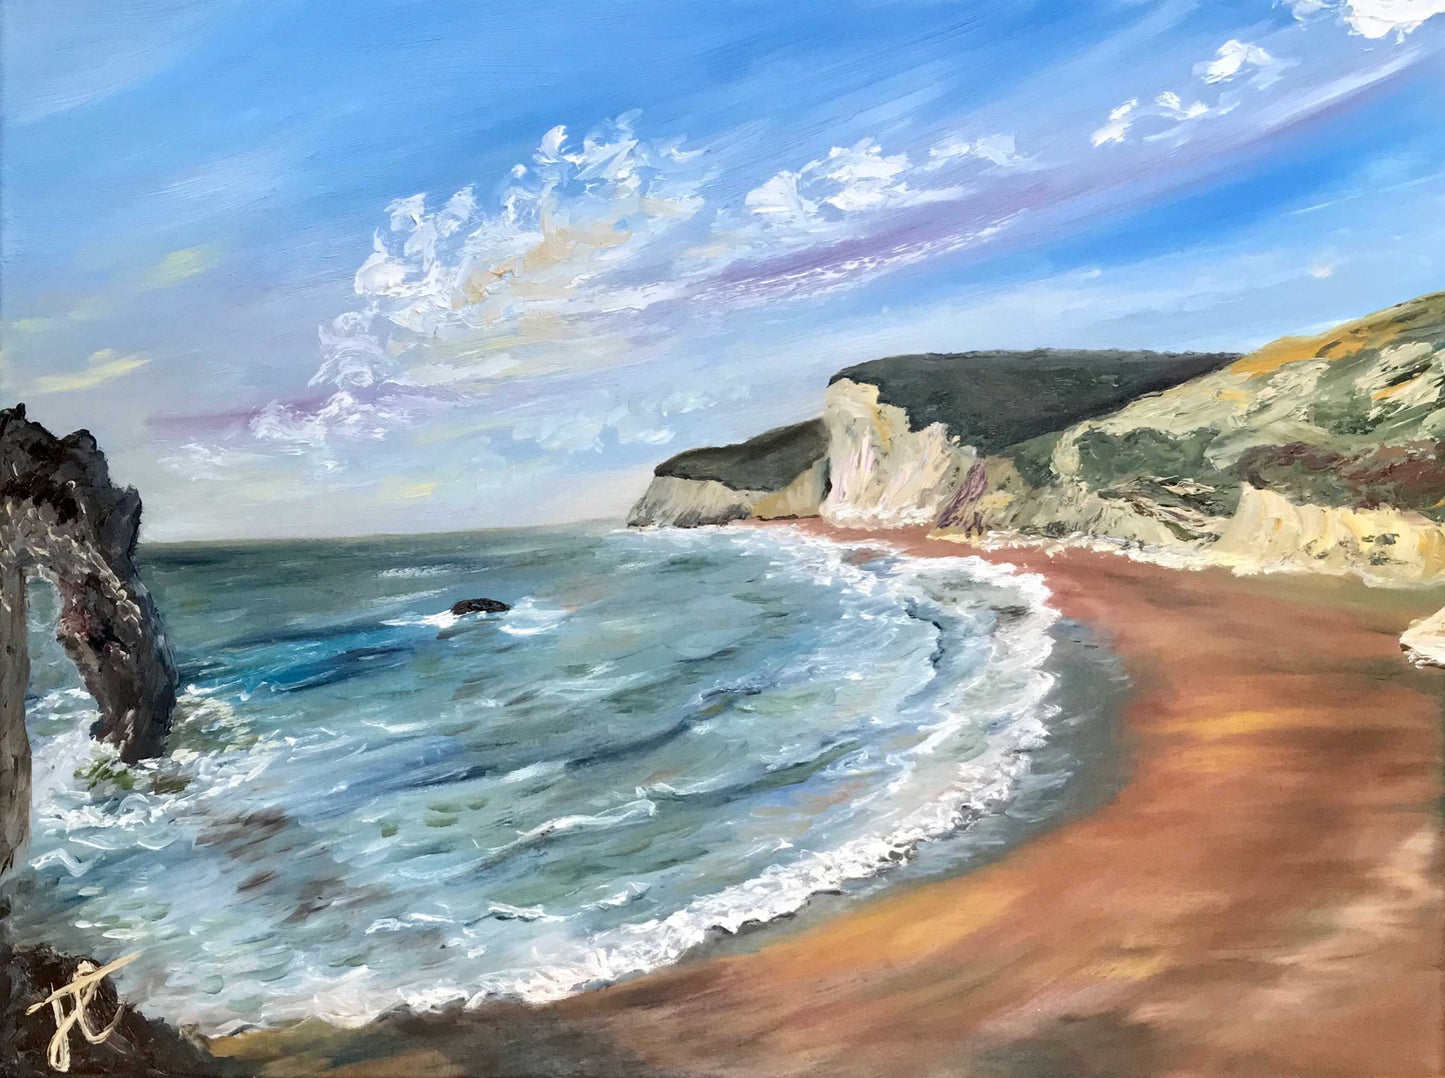 Painting cropped to edges: beach scene with Durdle Door on the left hand side, the curve of the waves breaking on the beach moves across the painting to the cliffs on the right hand side. 